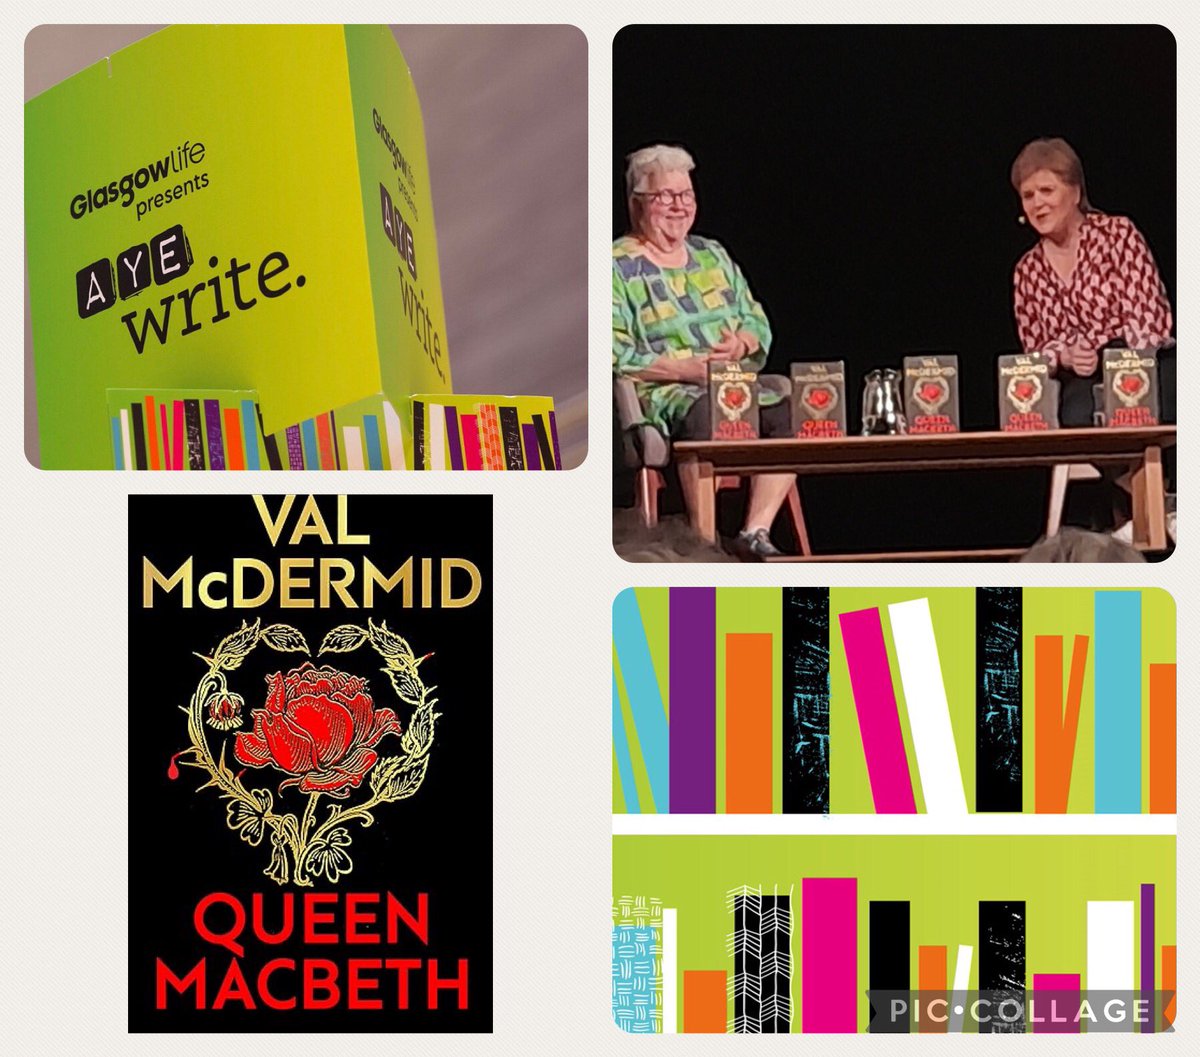 What a great @AyeWrite event! ⭐️⭐️⭐️⭐️⭐️Can’t wait to get started Queen Macbeth and see what see gets up to. @glasgowlife @valmcdermid @NicolaSturgeon #smartwummin